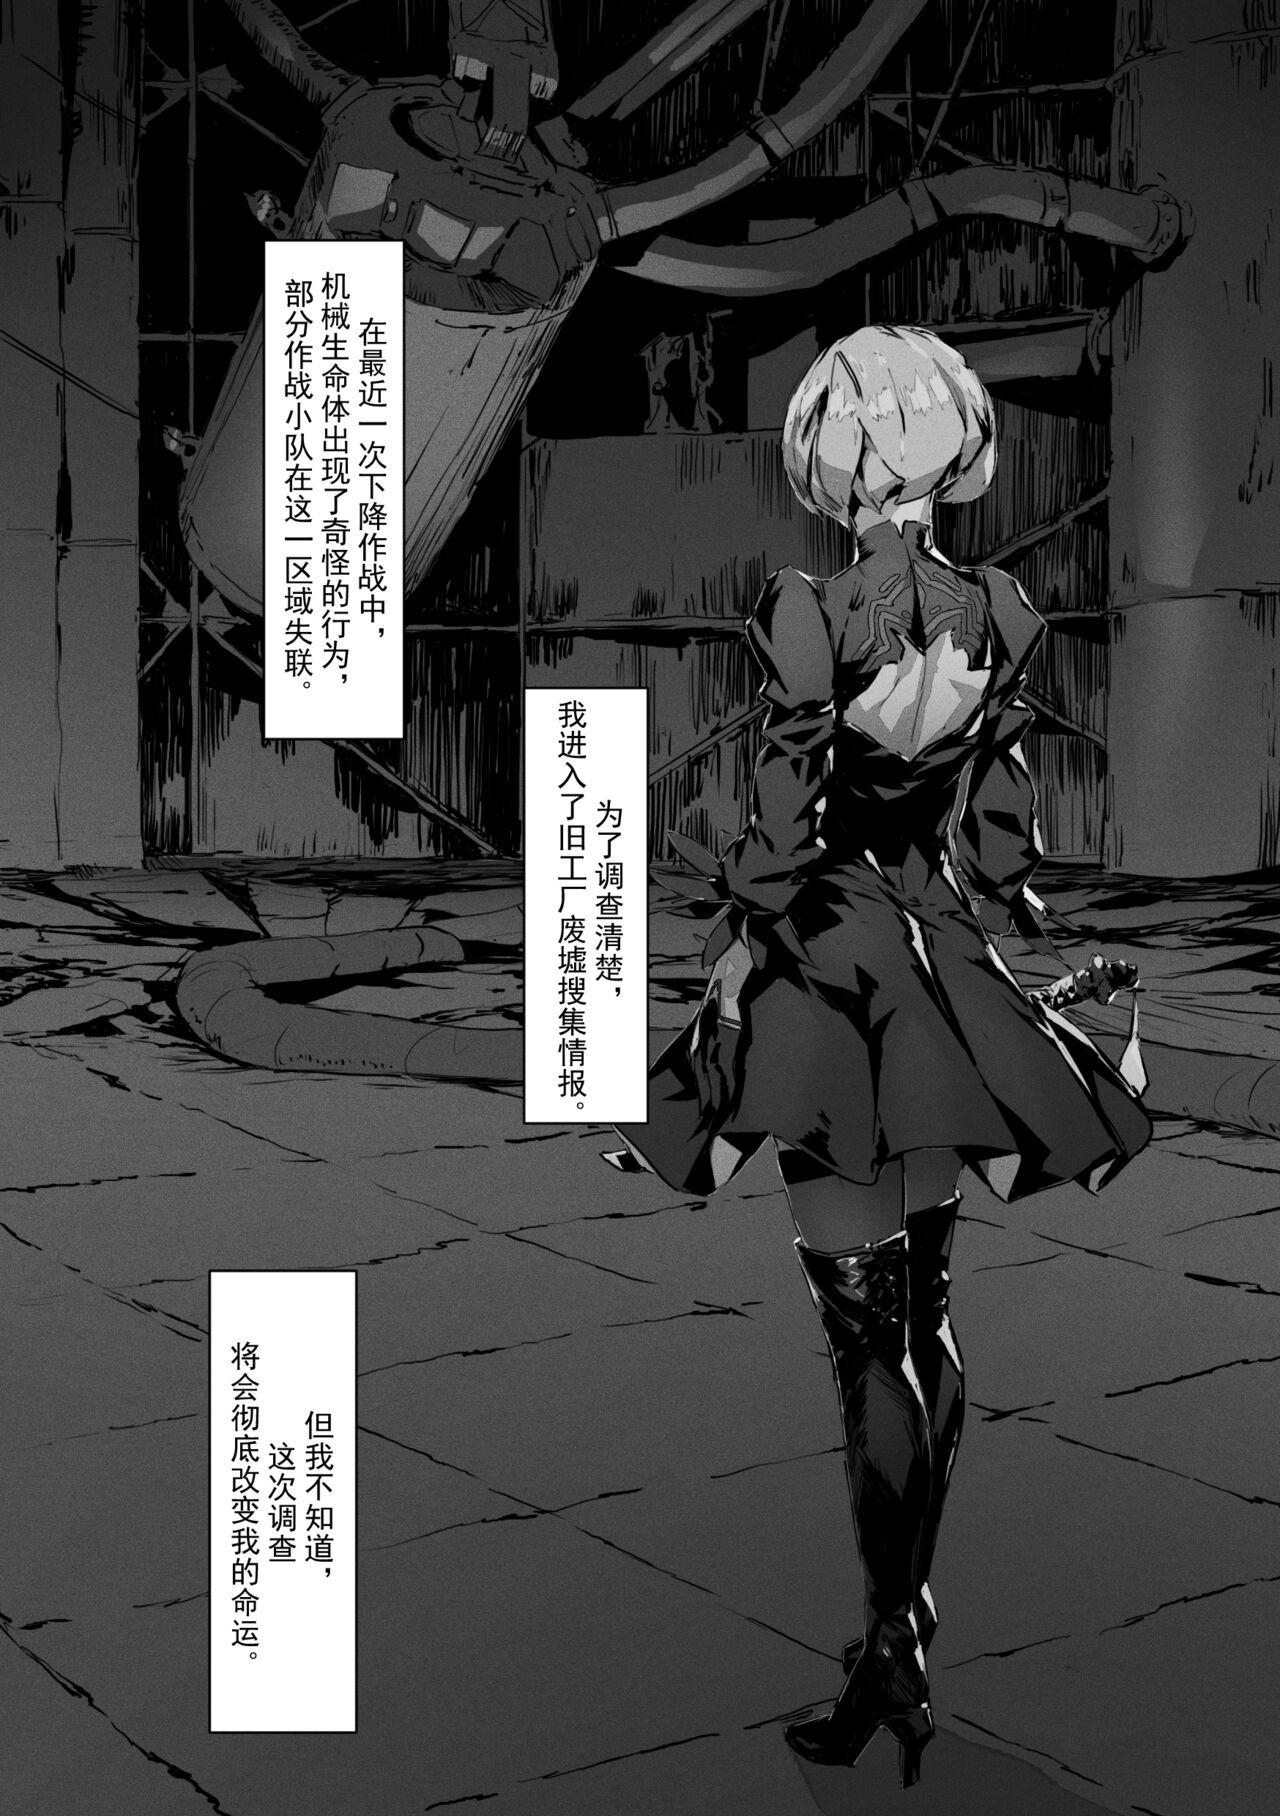 2B In Trouble Part 1-6 0